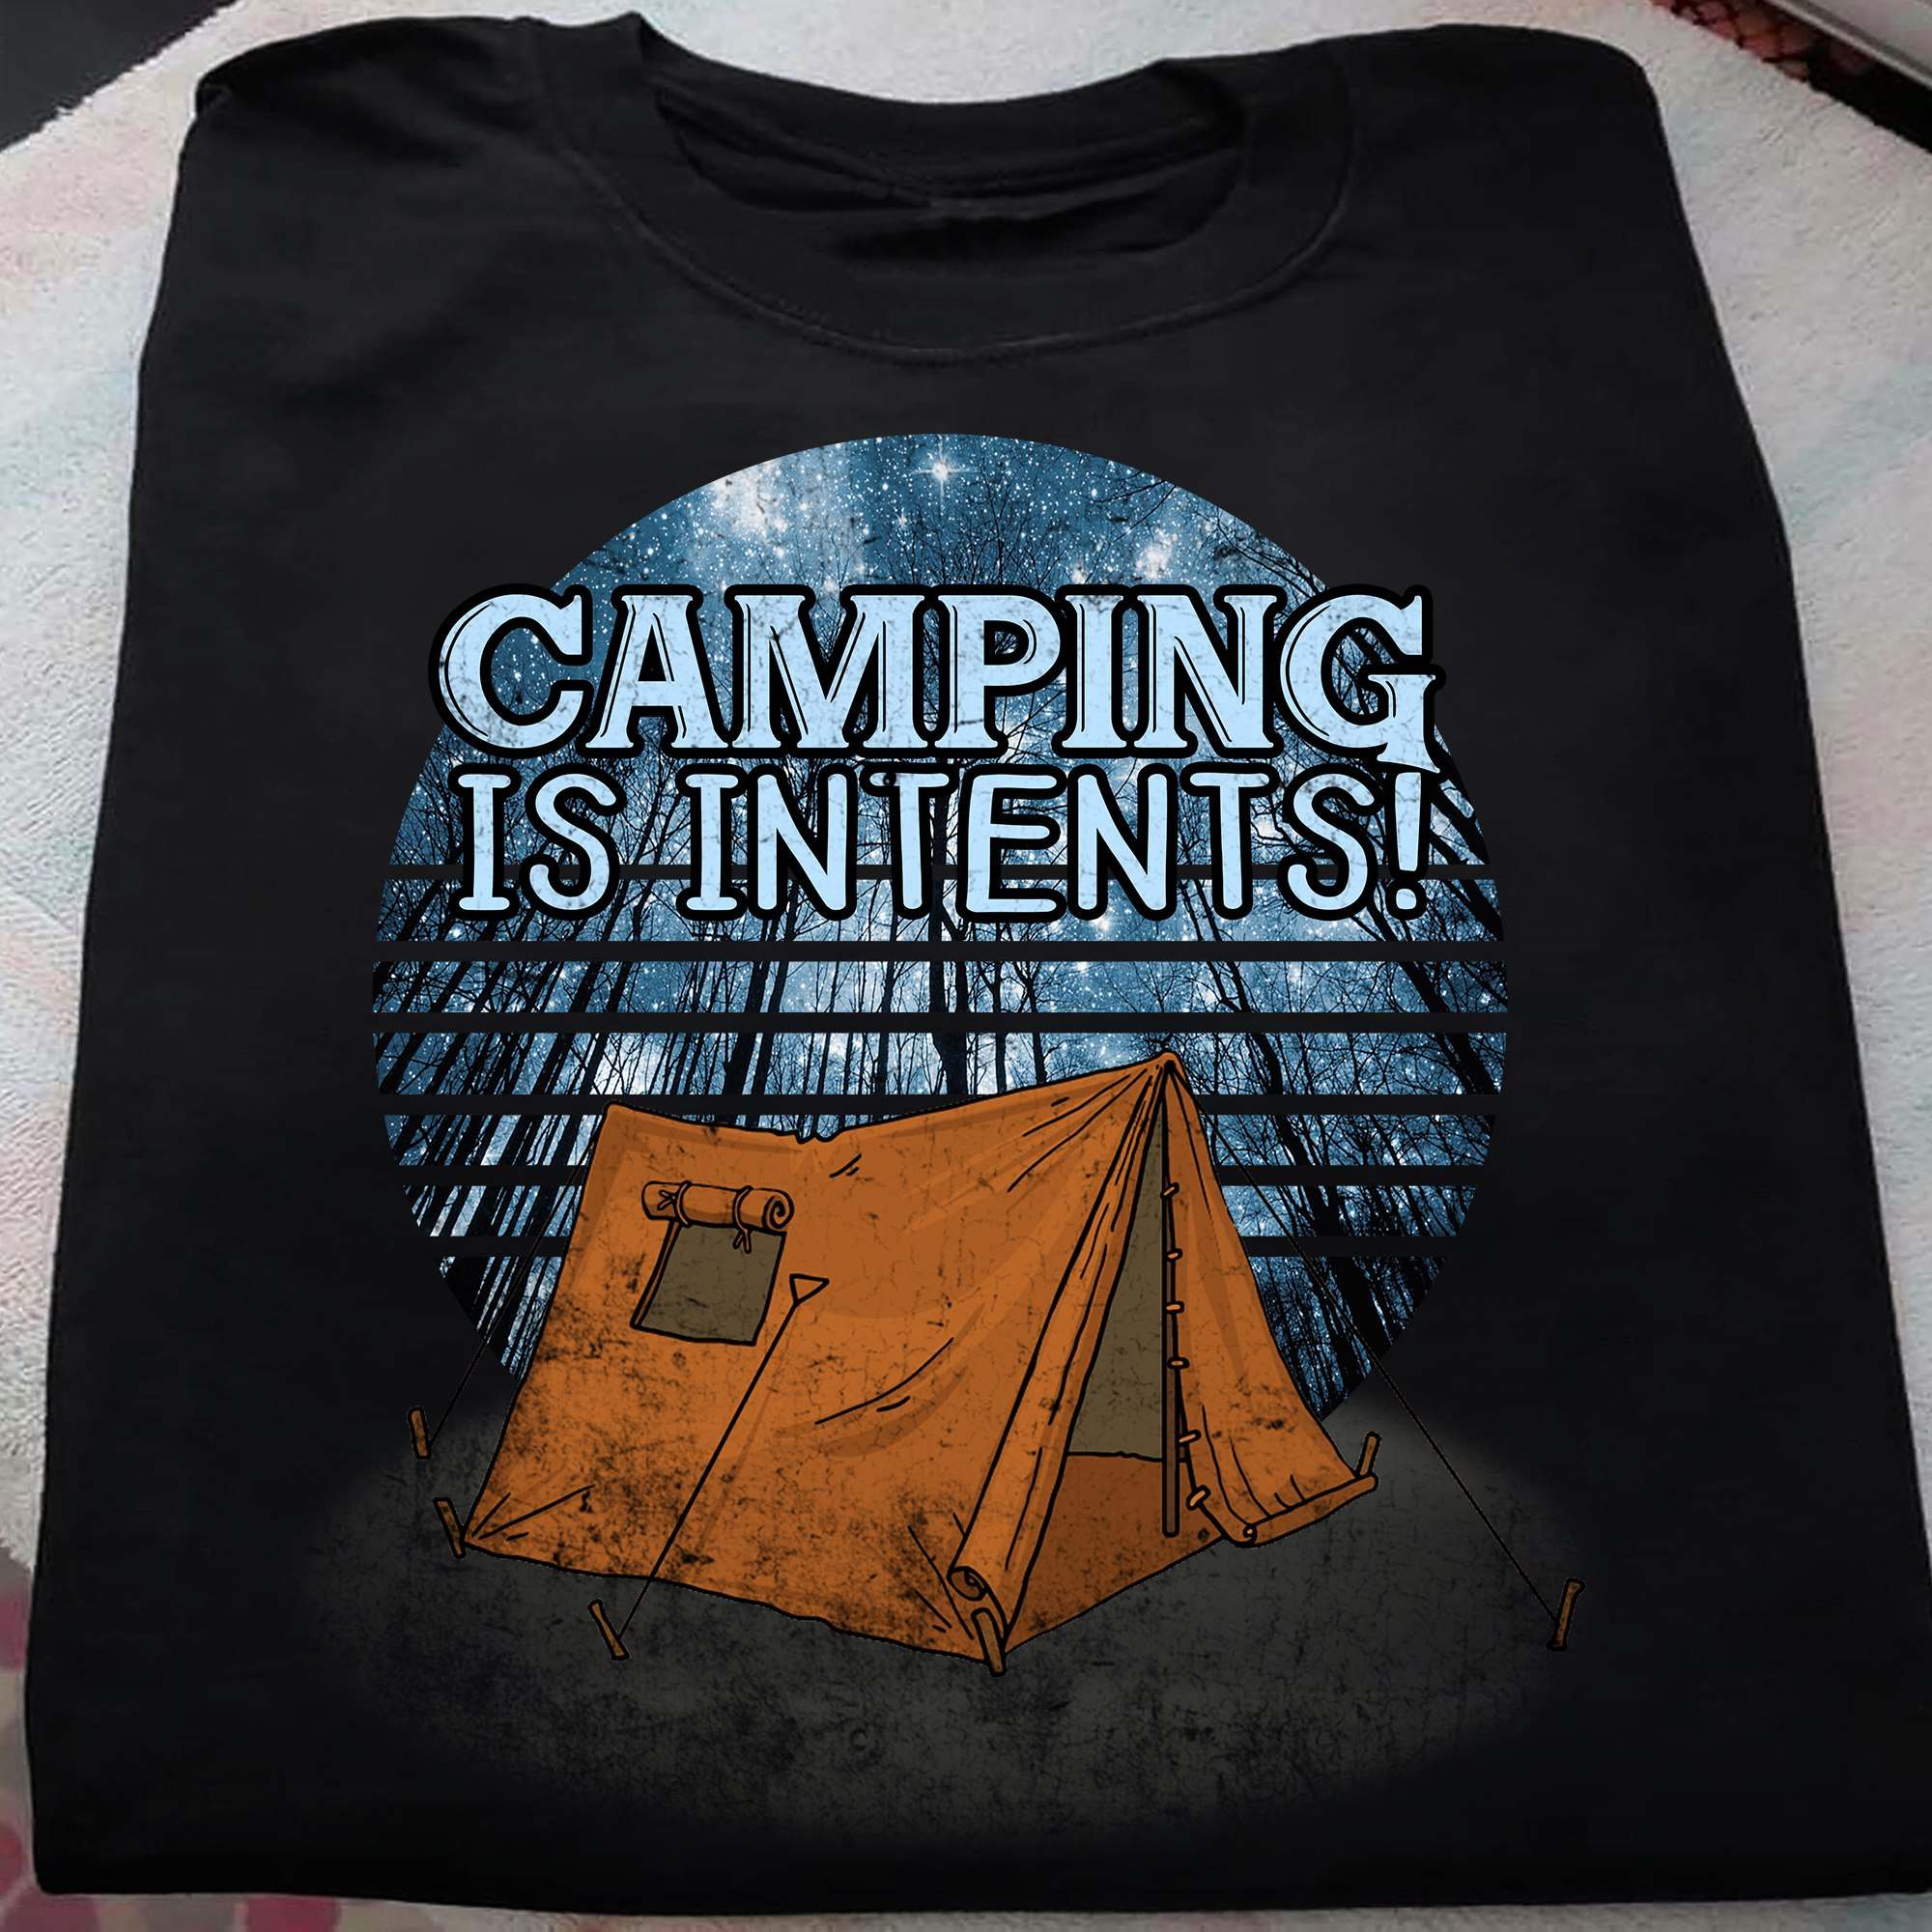 Camping is intents - Love camping, camping under the stars